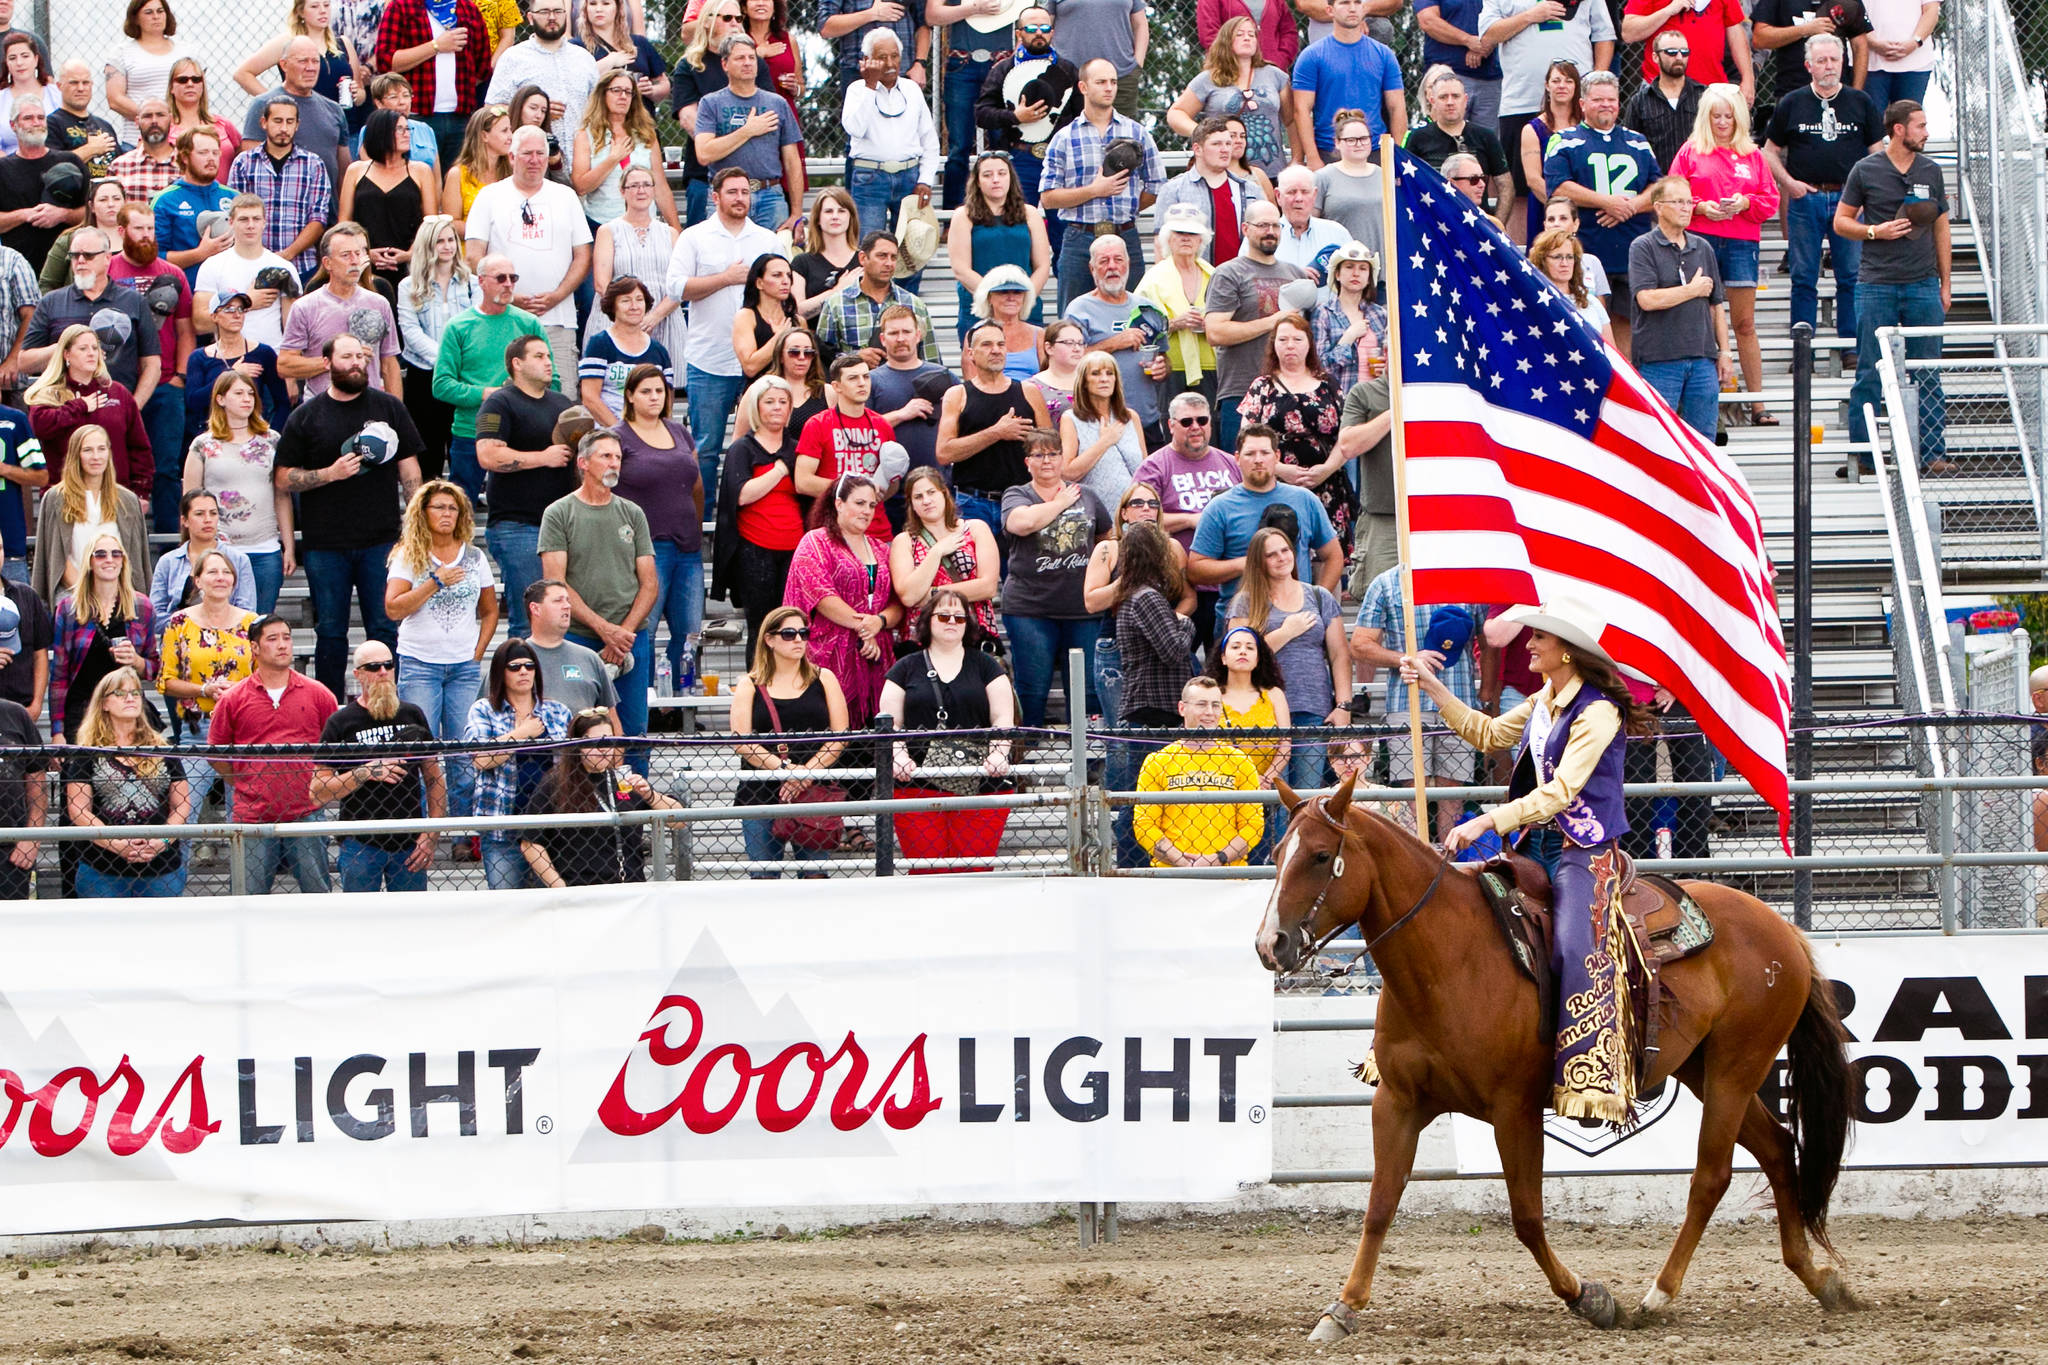 The rodeo will be a highlight of this year's Kitsap Fair and Stampede. PRCA ProRodeo photo by Kent Soule.